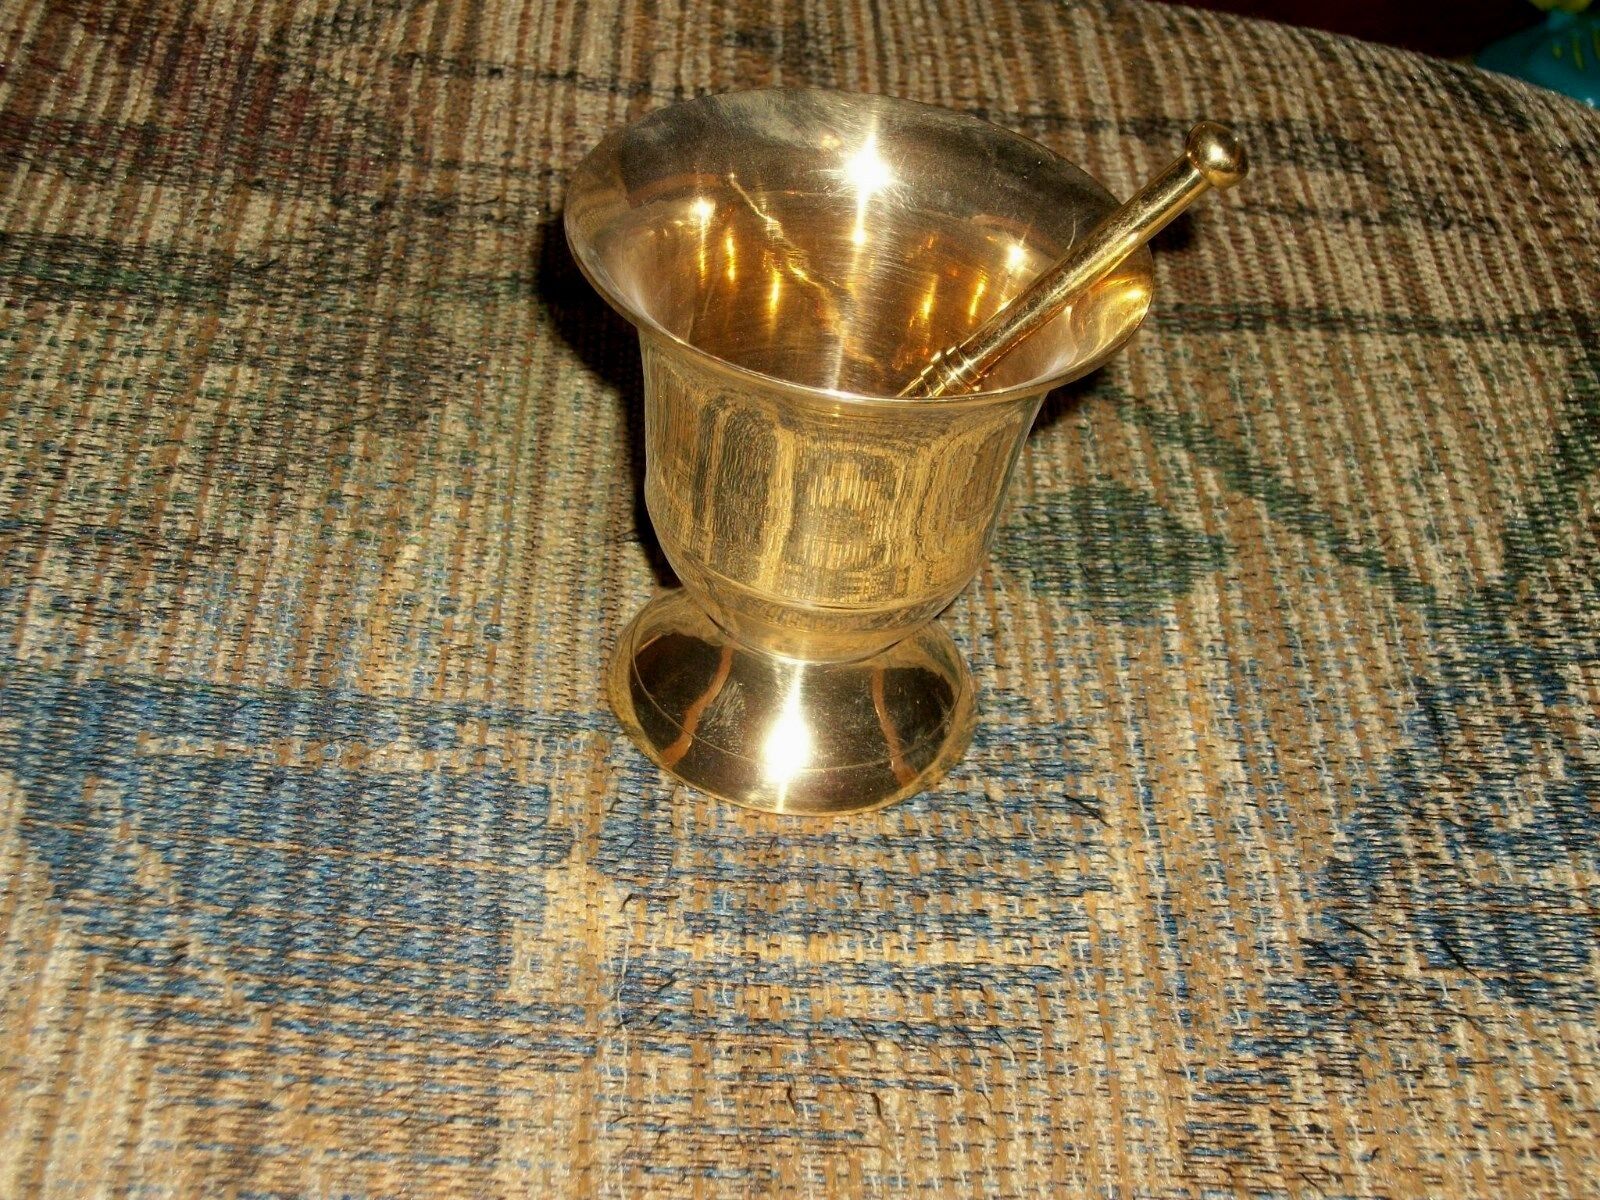 NEW Brass Mortar and Pestle Apothecary Herbal Decorative Useable medicine herb